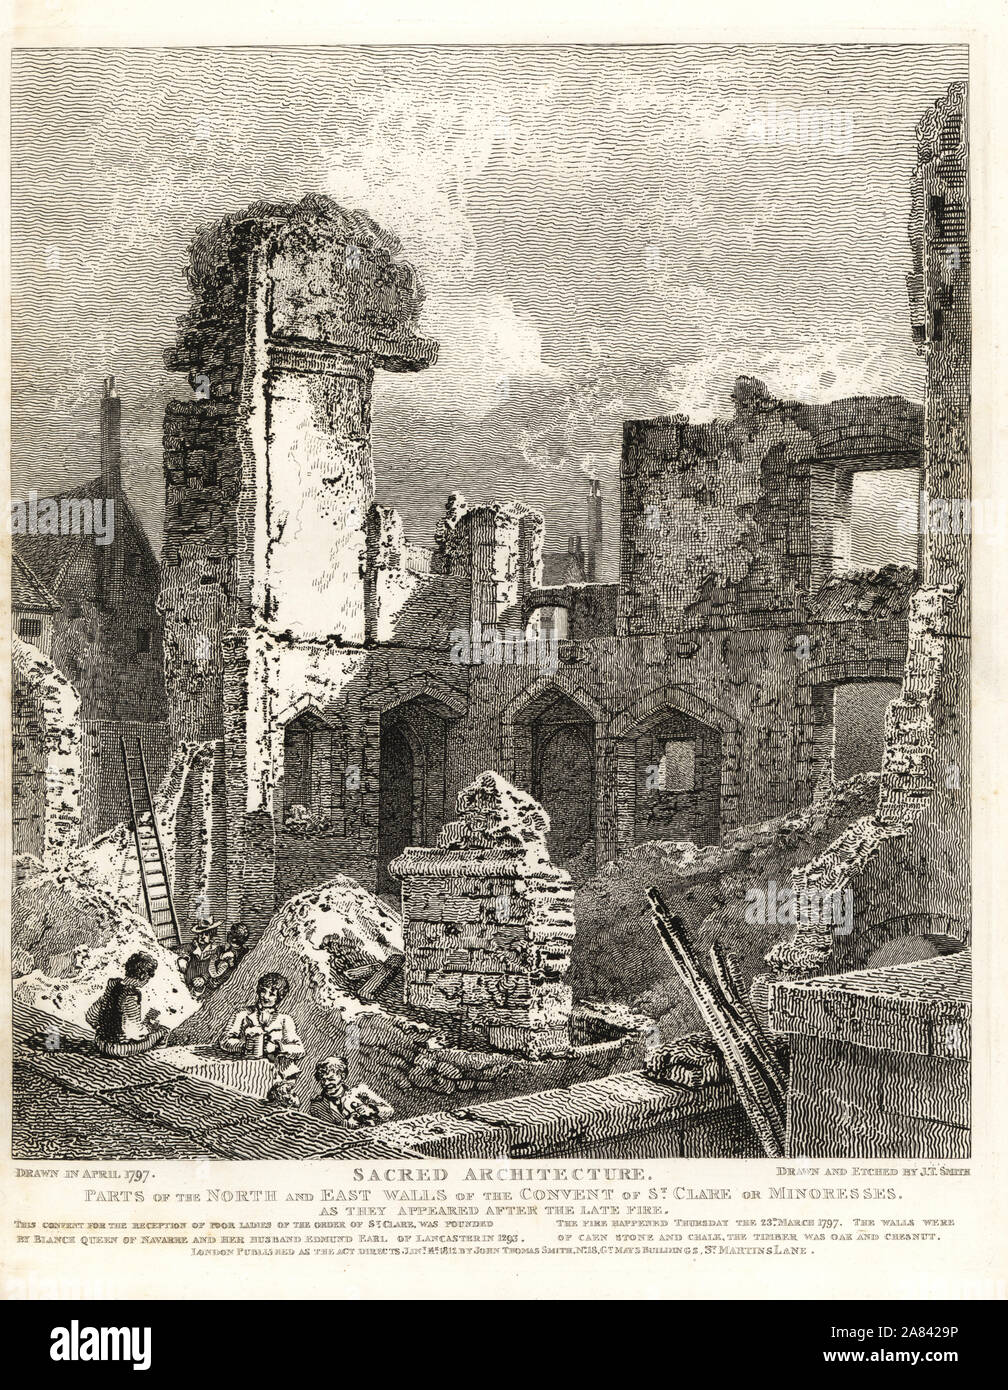 Parts of the north and east walls of the Convent of St. Clare or Minoresses, founded 1293. After the fire of March 23, 1797. Walls of Caen stone and chalk, timber oak and chestnut. Copperplate engraving drawn and etched by John Thomas Smith from his Topography of London, 1812. Stock Photo